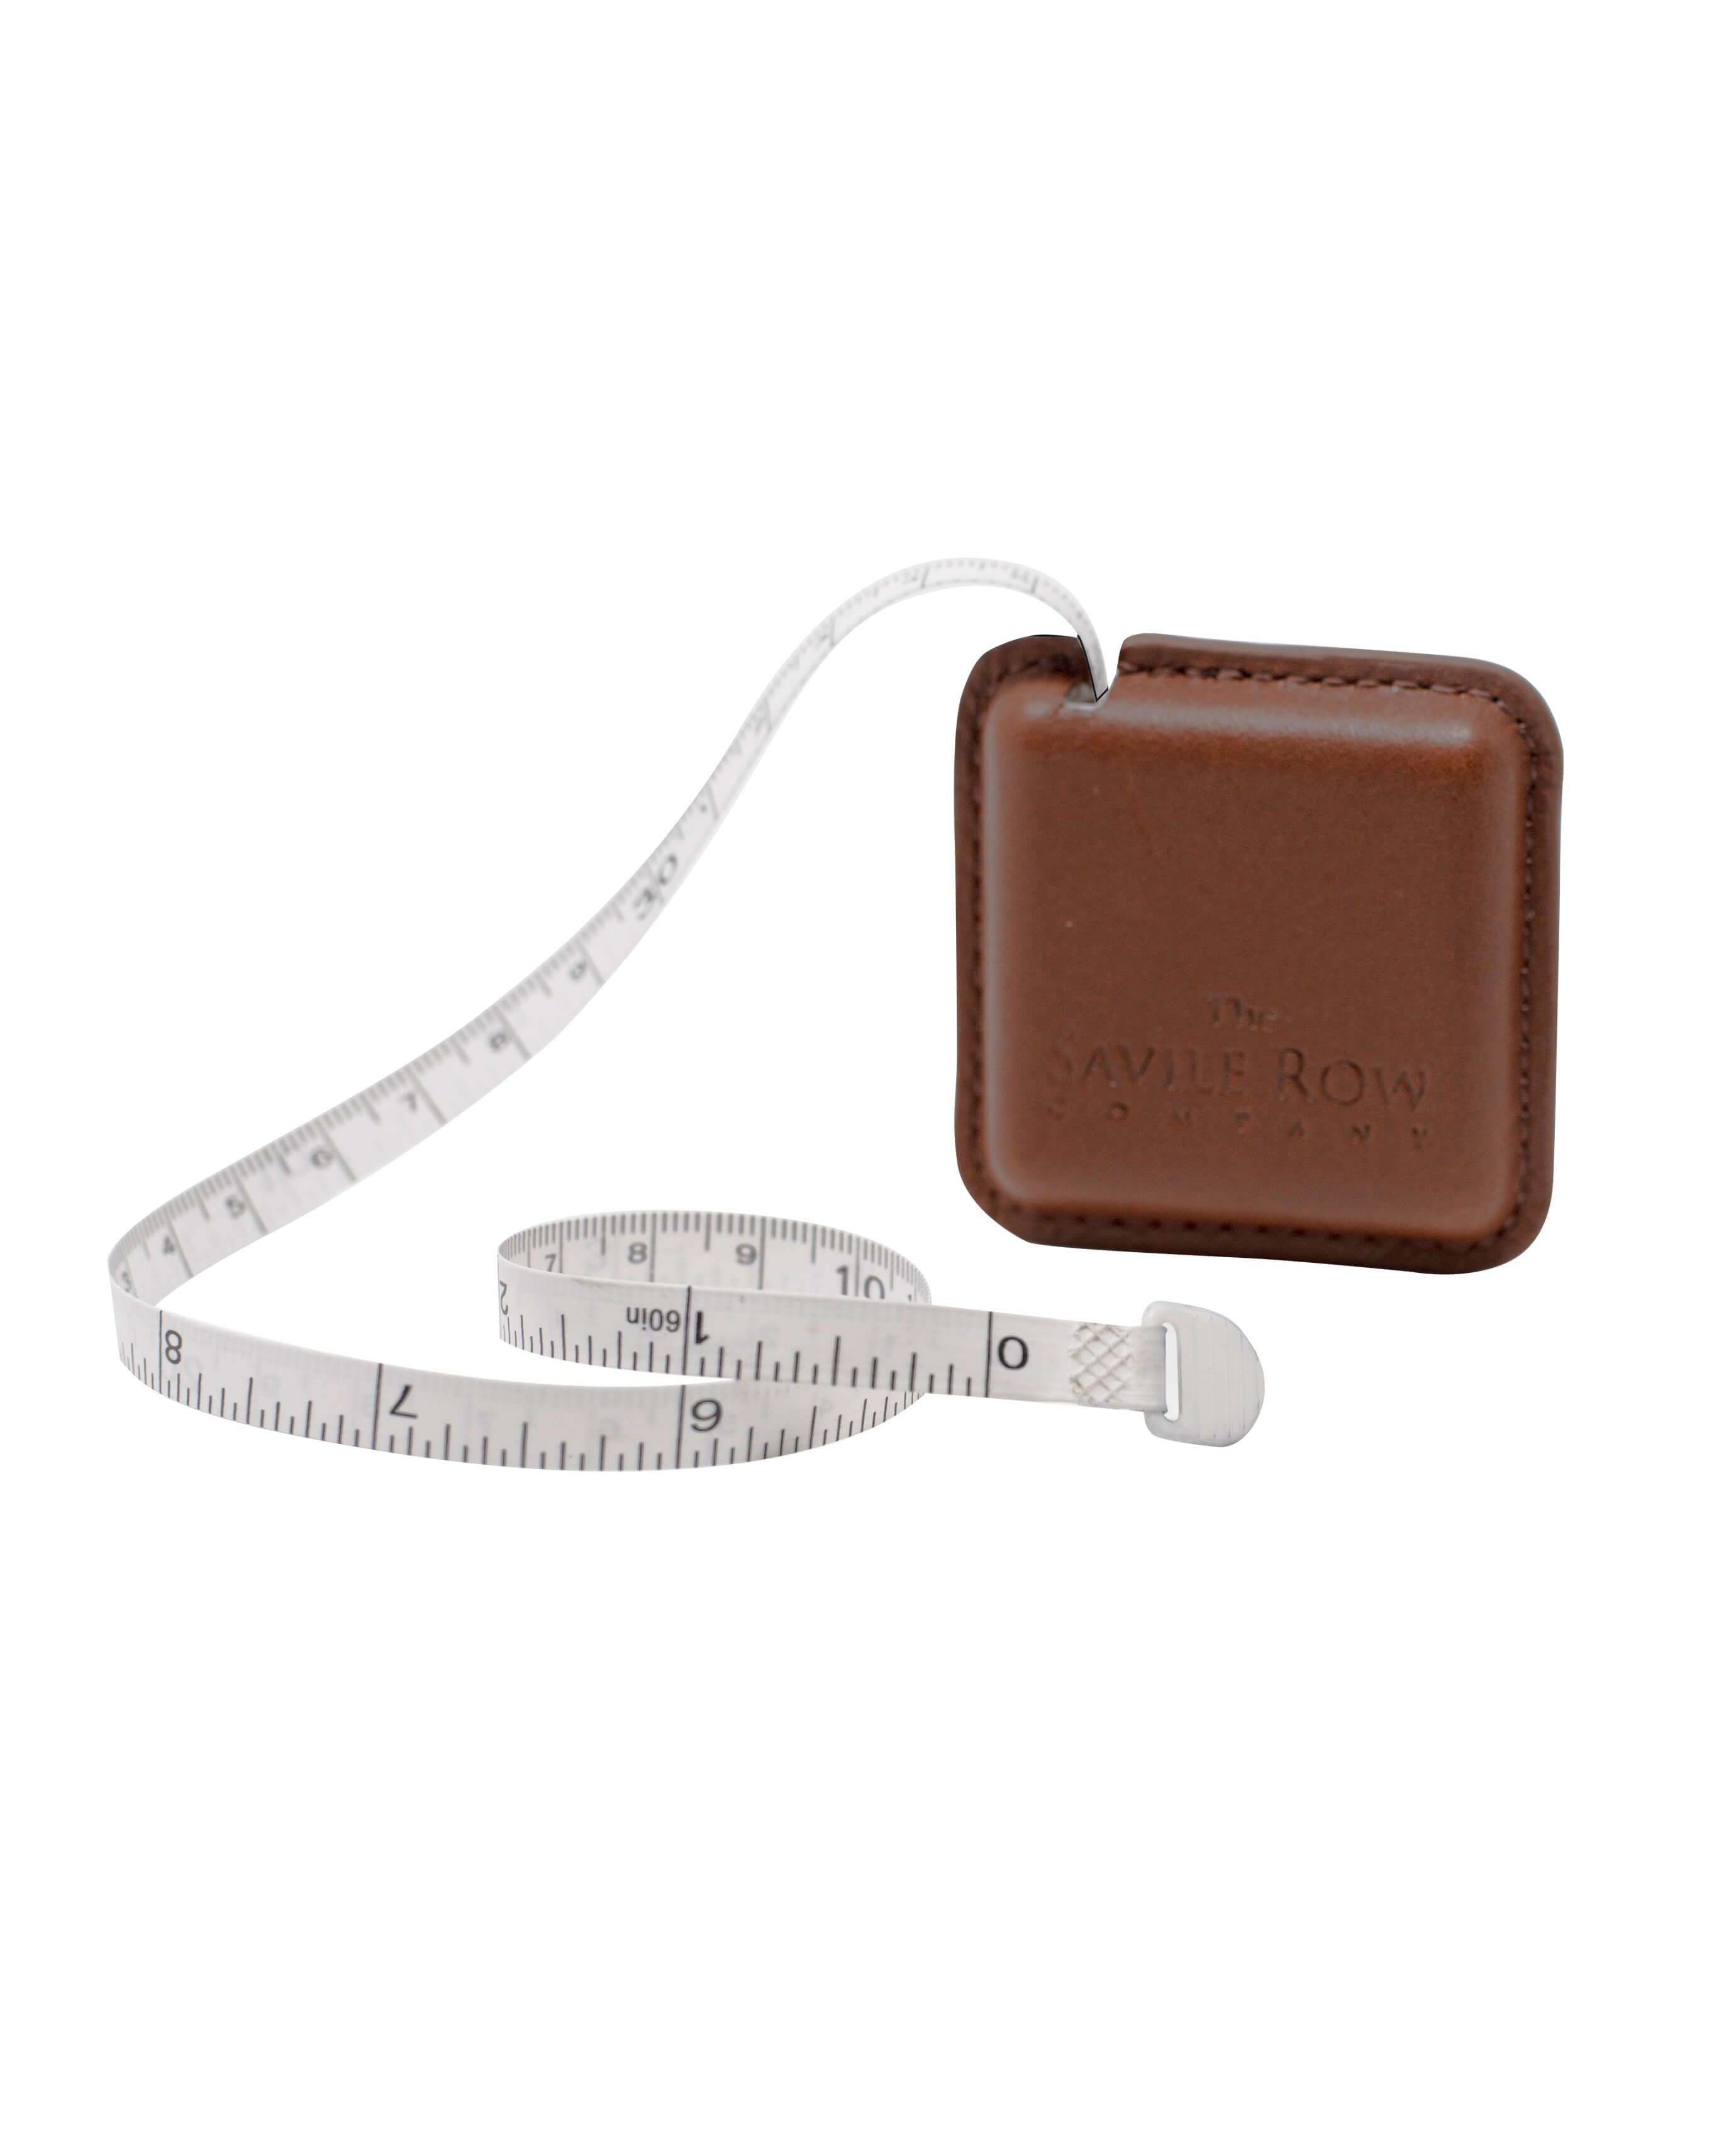 https://savilerowco.com/media/catalog/product/cache/2accacfcf7bc449eee367fe2319d84b6/t/a/tan-leather-tape-measure-out-mlg1030tan.jpg